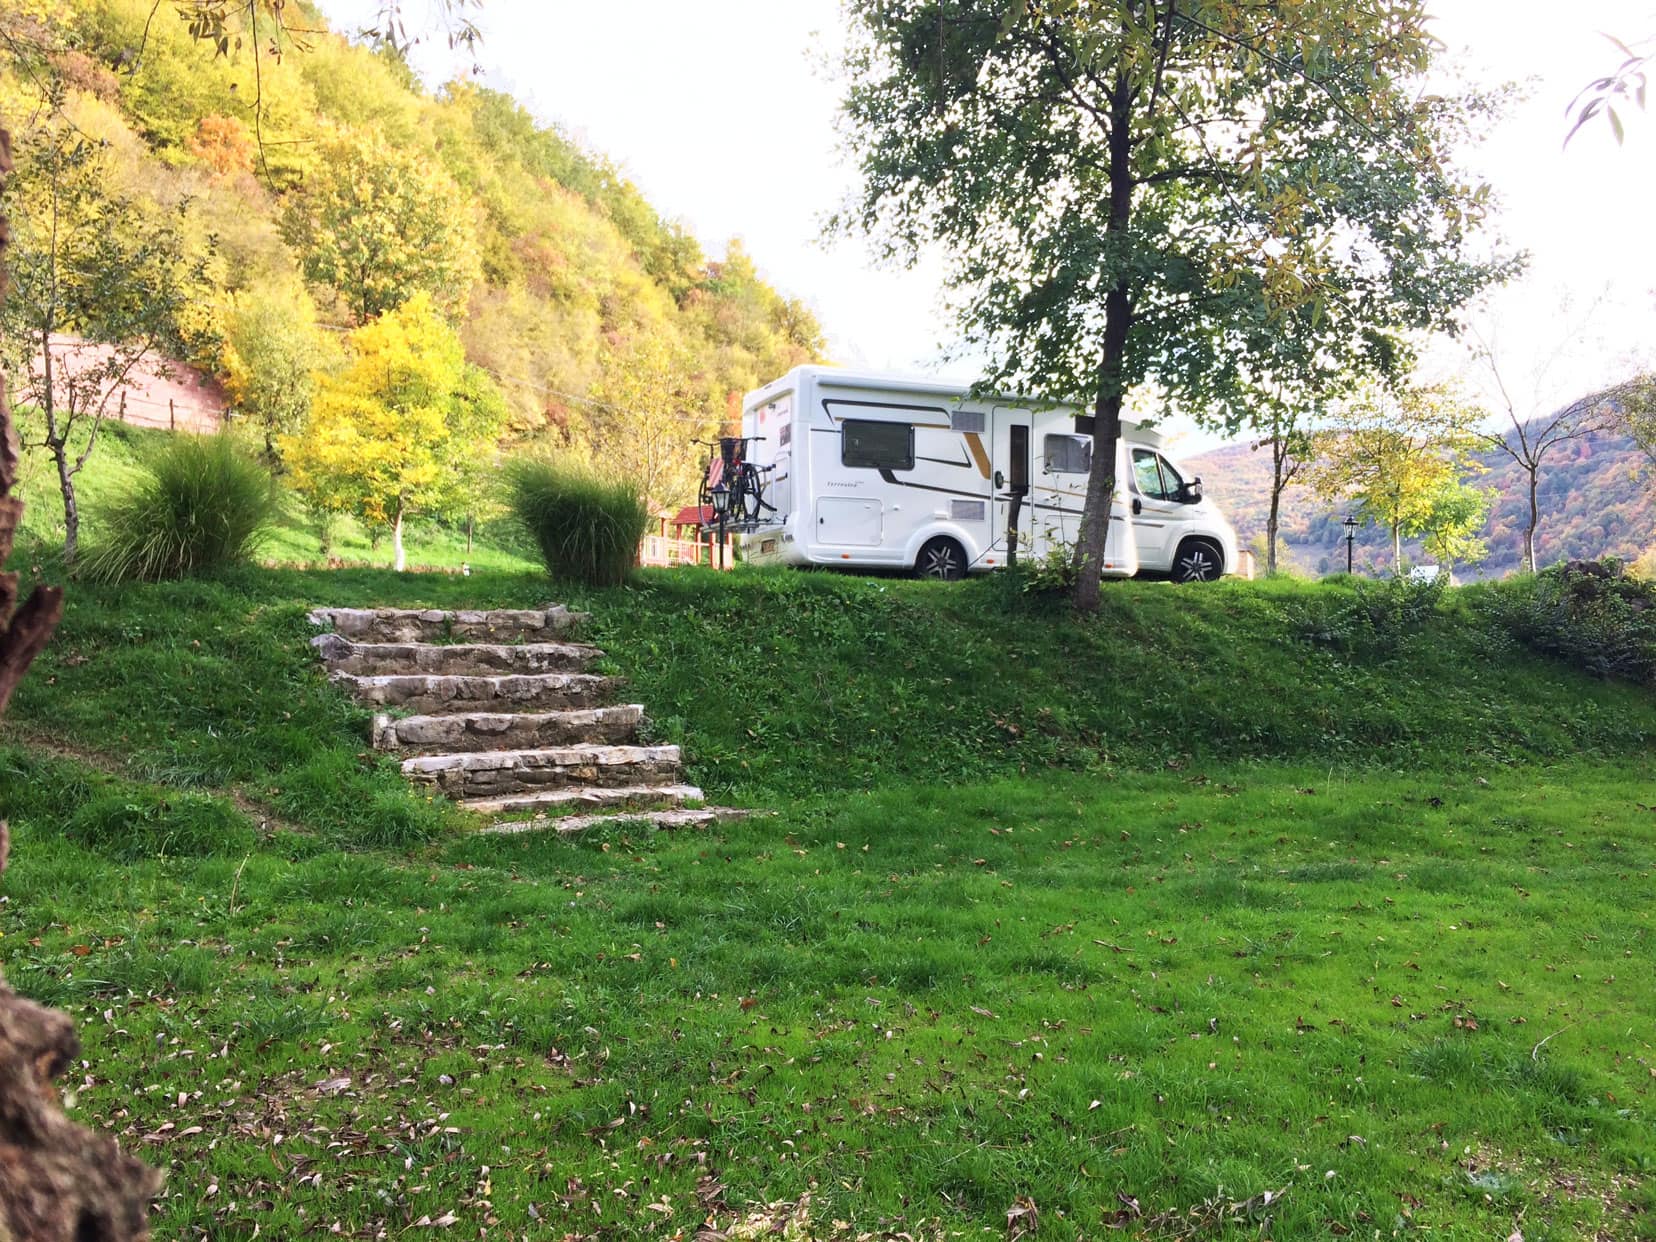 Motorhome parked by green field and stone steps